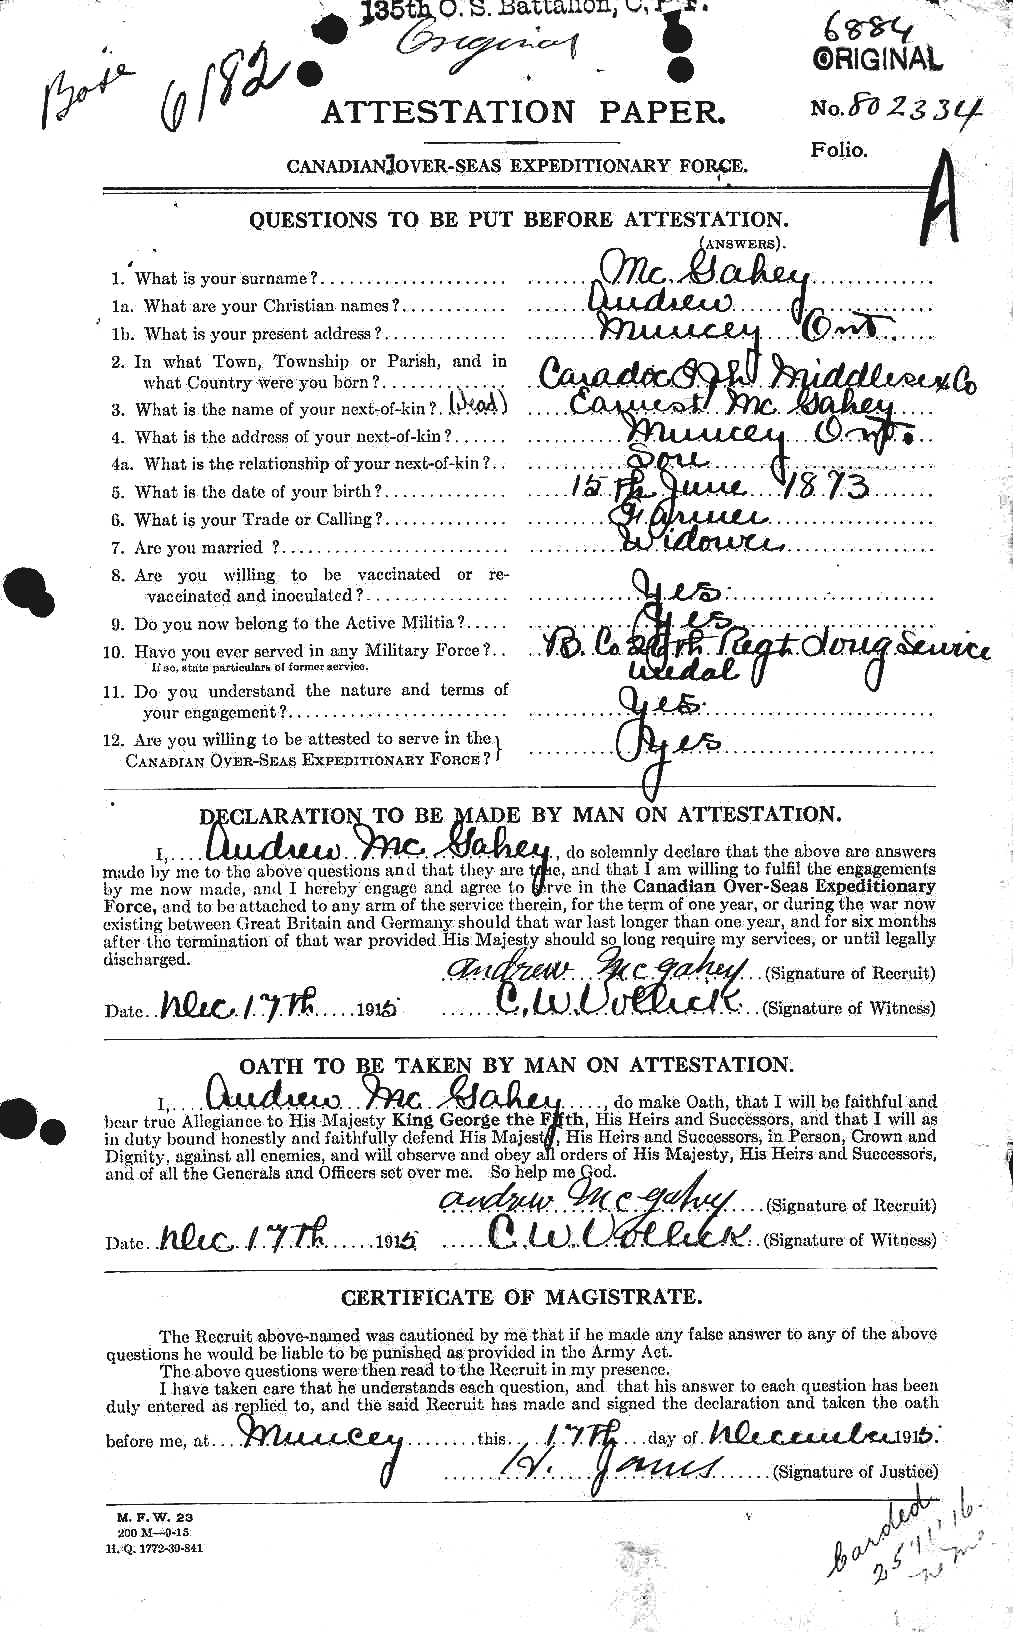 Personnel Records of the First World War - CEF 522653a